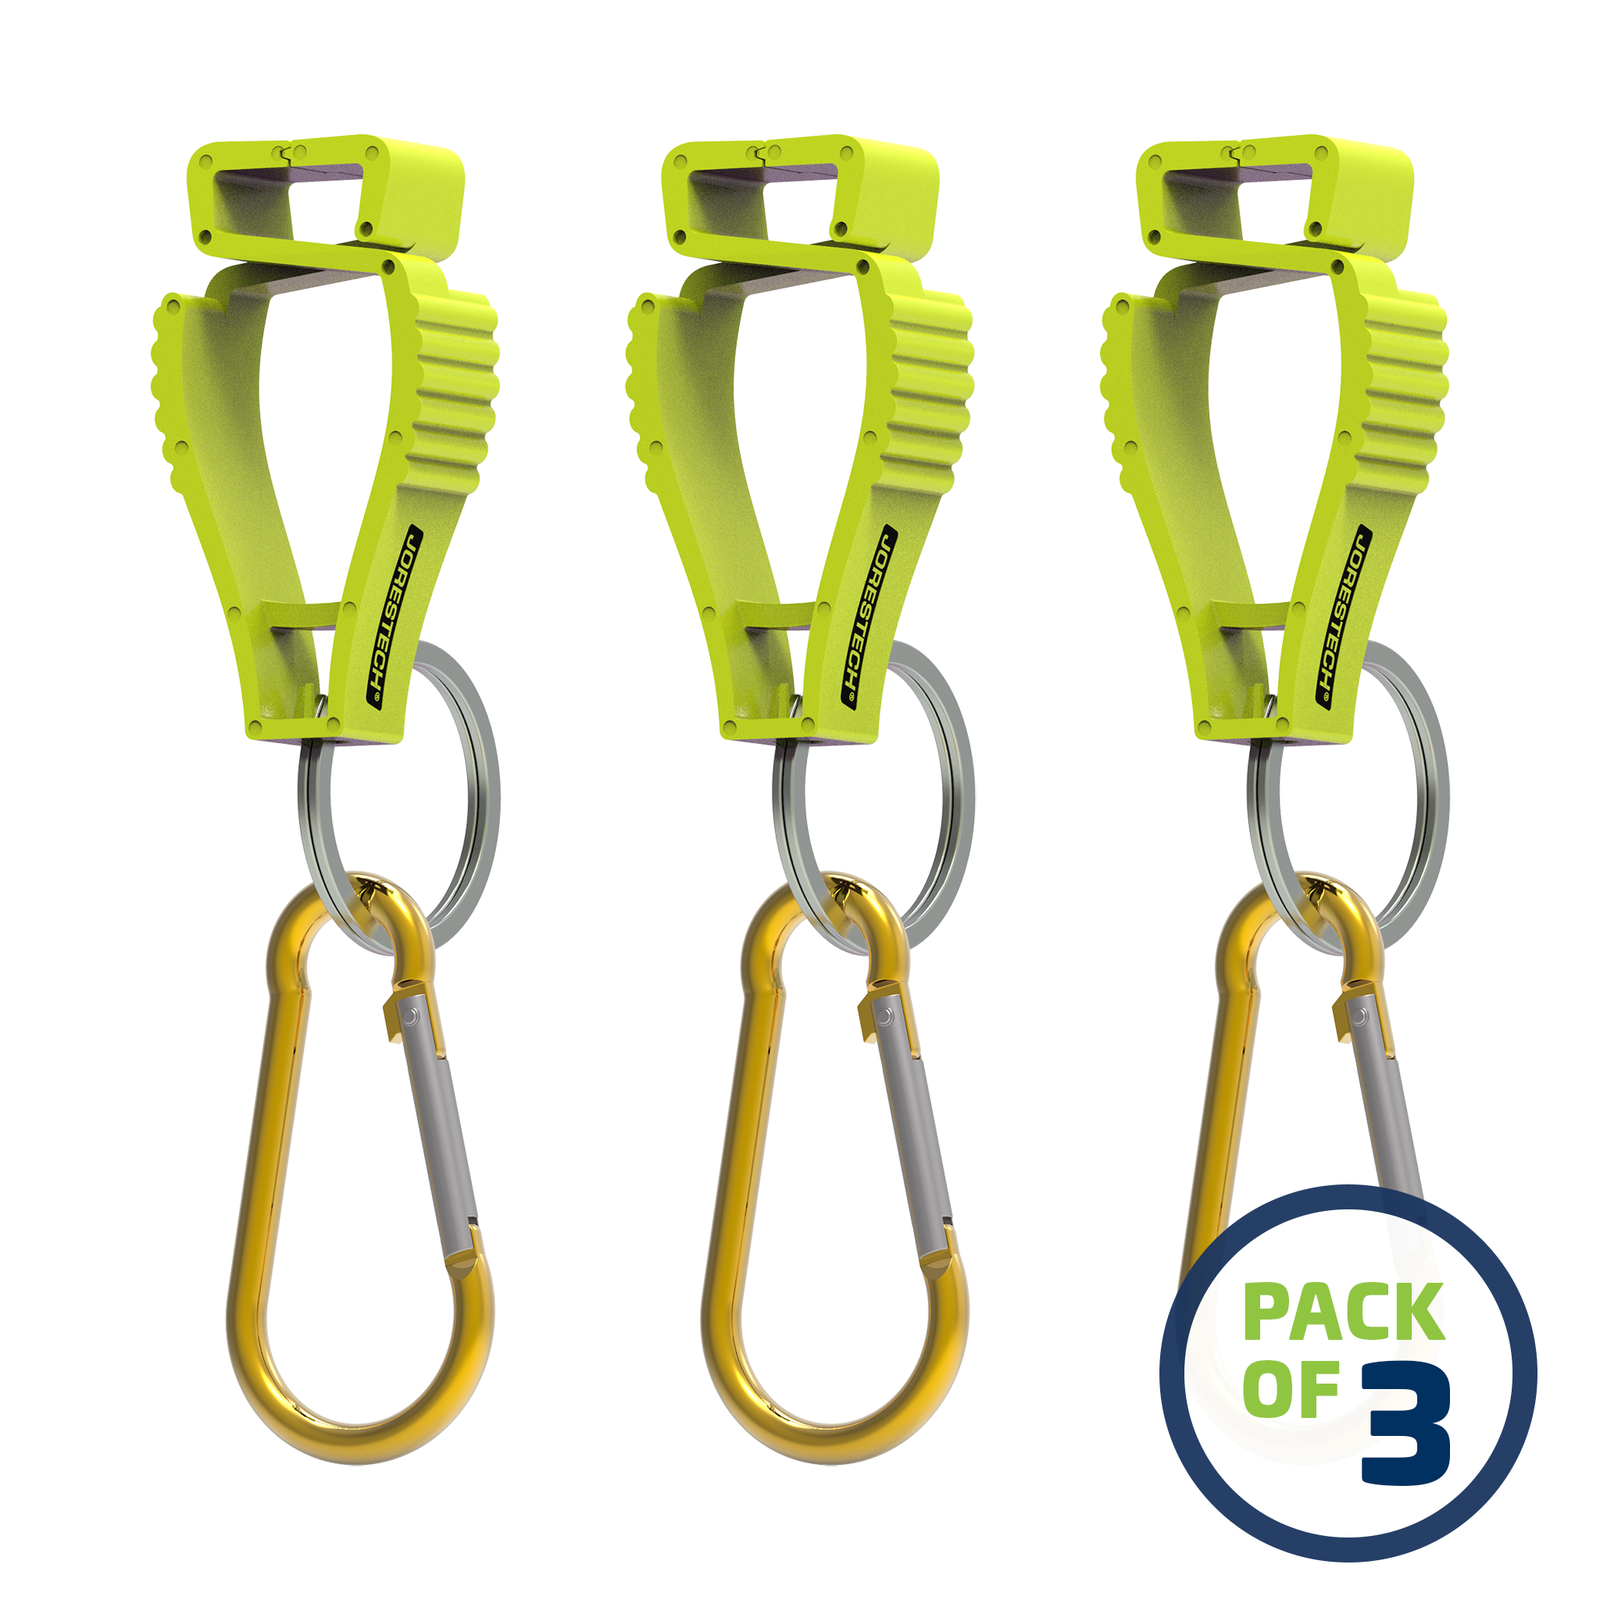 Pack of 3 Lime JORESTECH glove clip safety holders with carabiner 